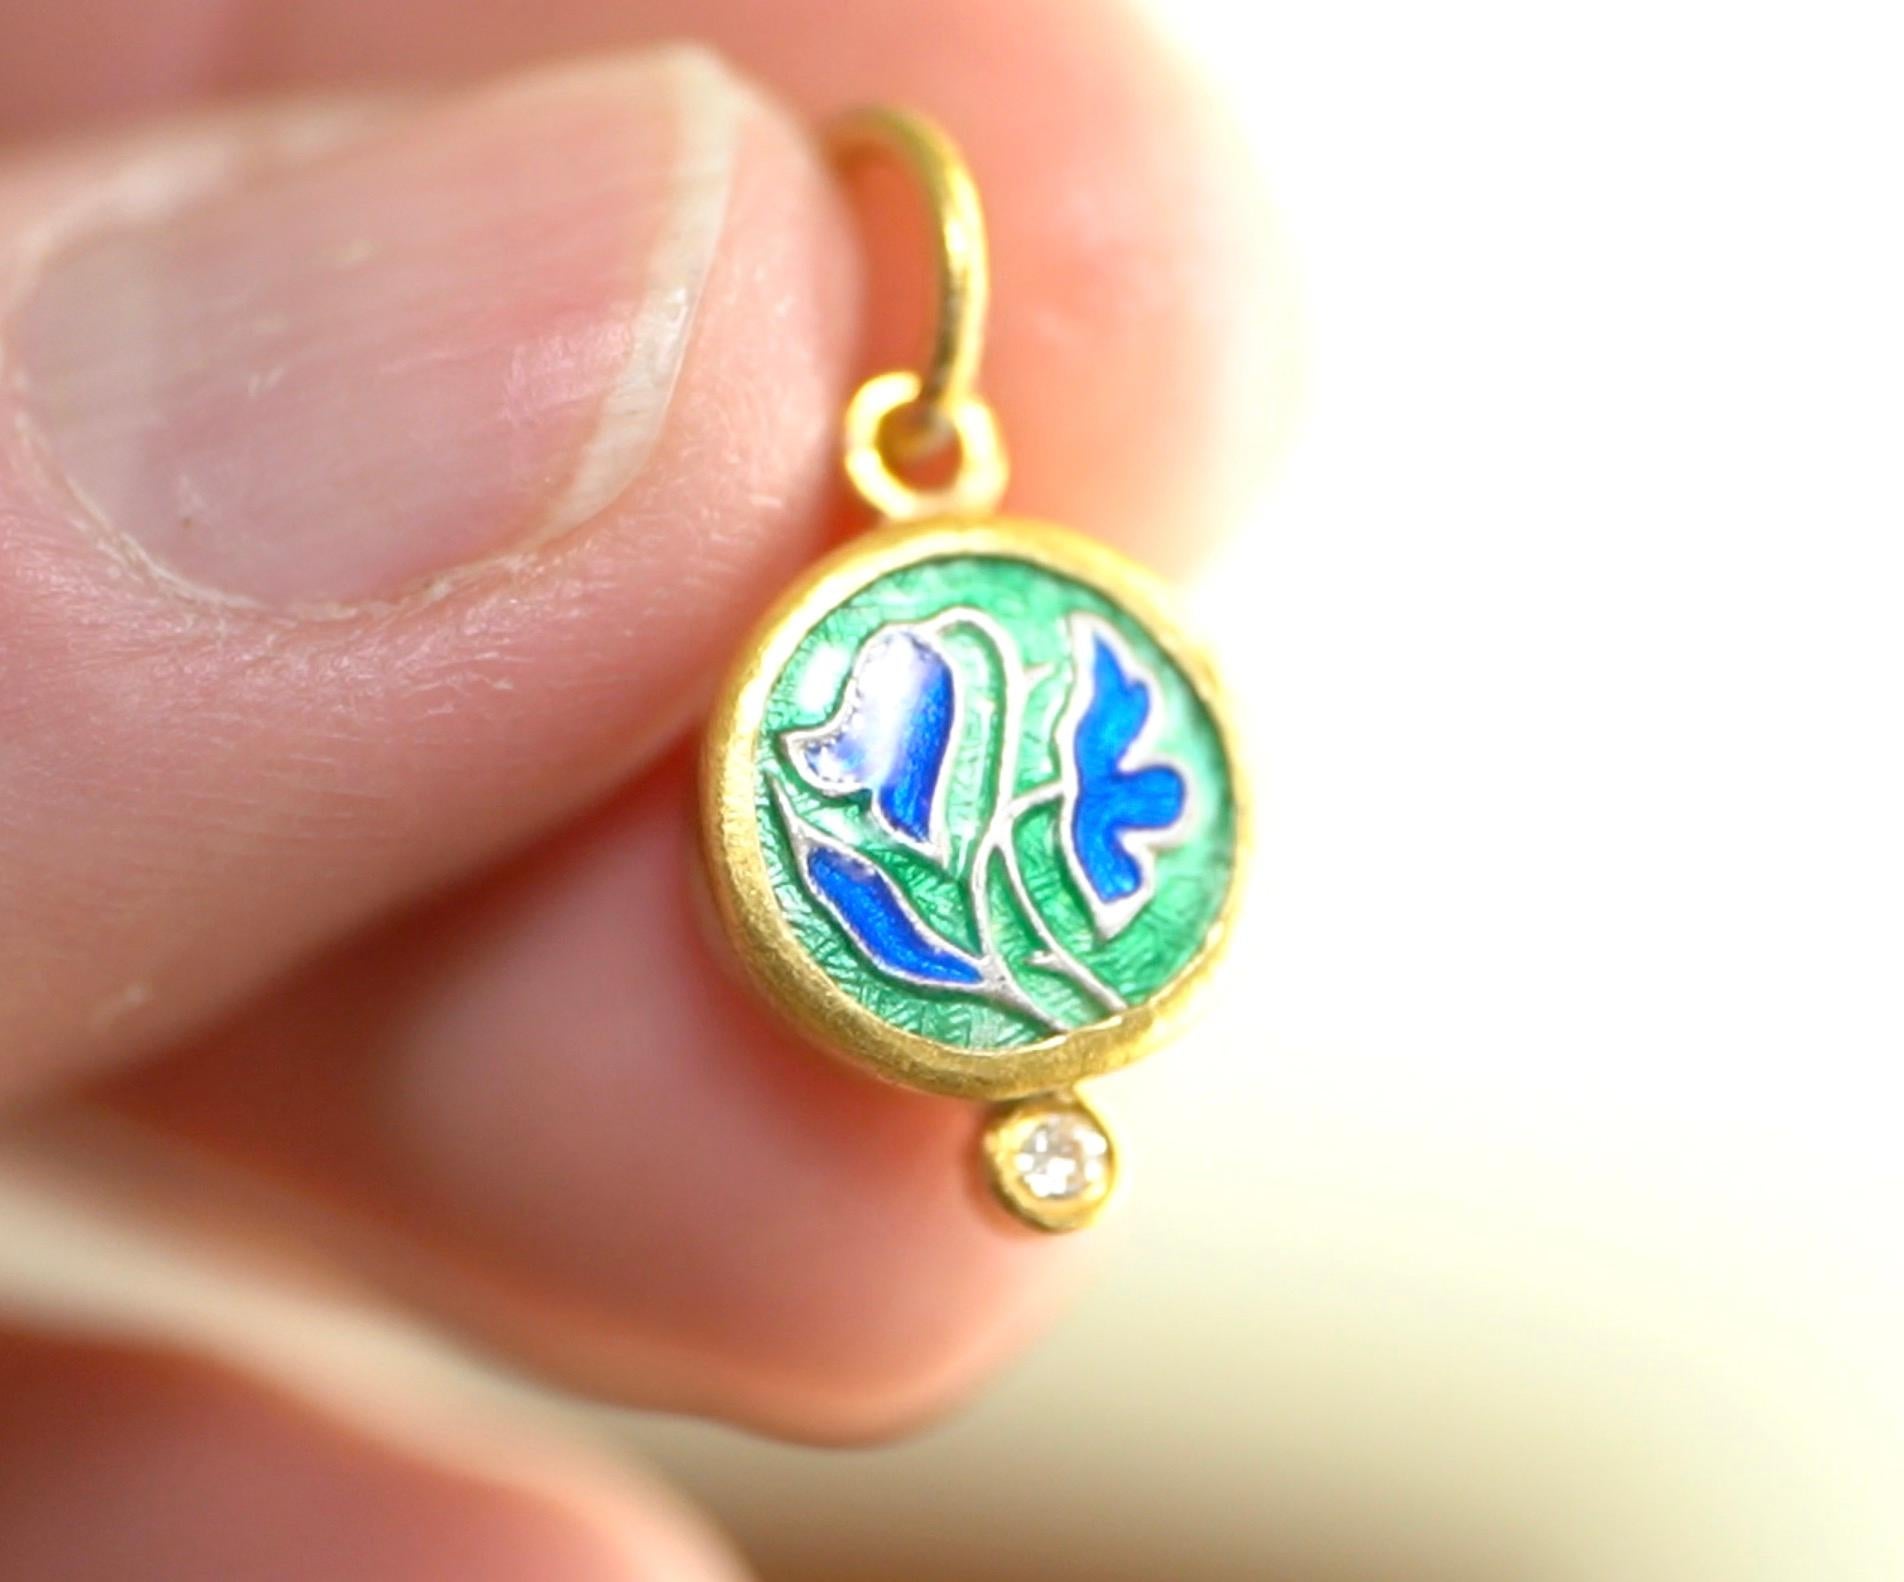 Contemporary Enamel Tulips Charm in Green & Blue, Amulet Pendant Necklace w/ Diamond 24k Gold For Sale